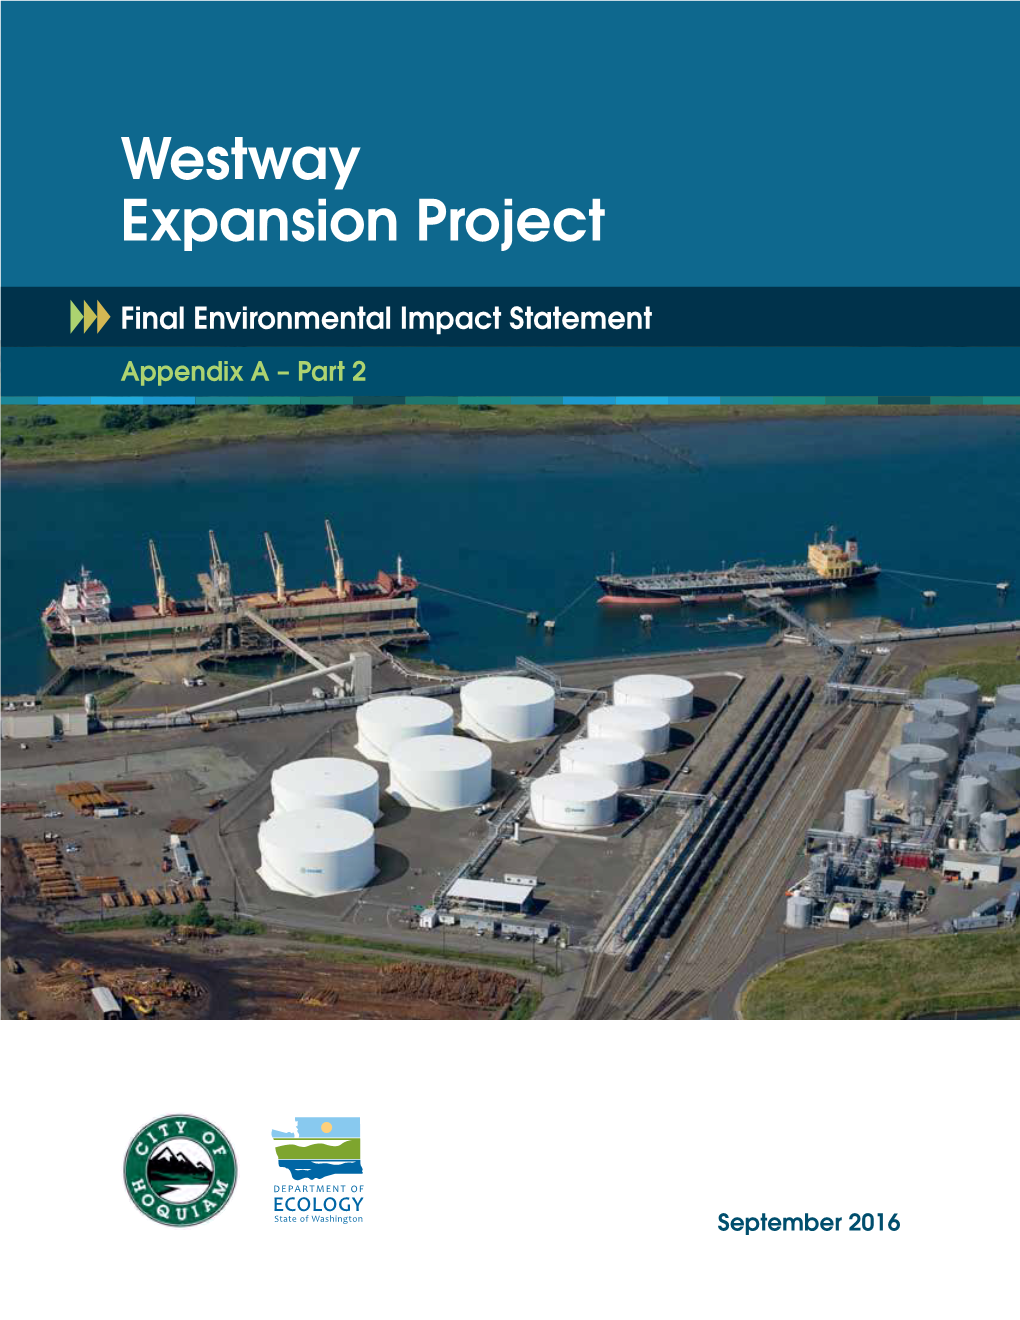 Westway Expansion Project Final Environmental Impact Statement